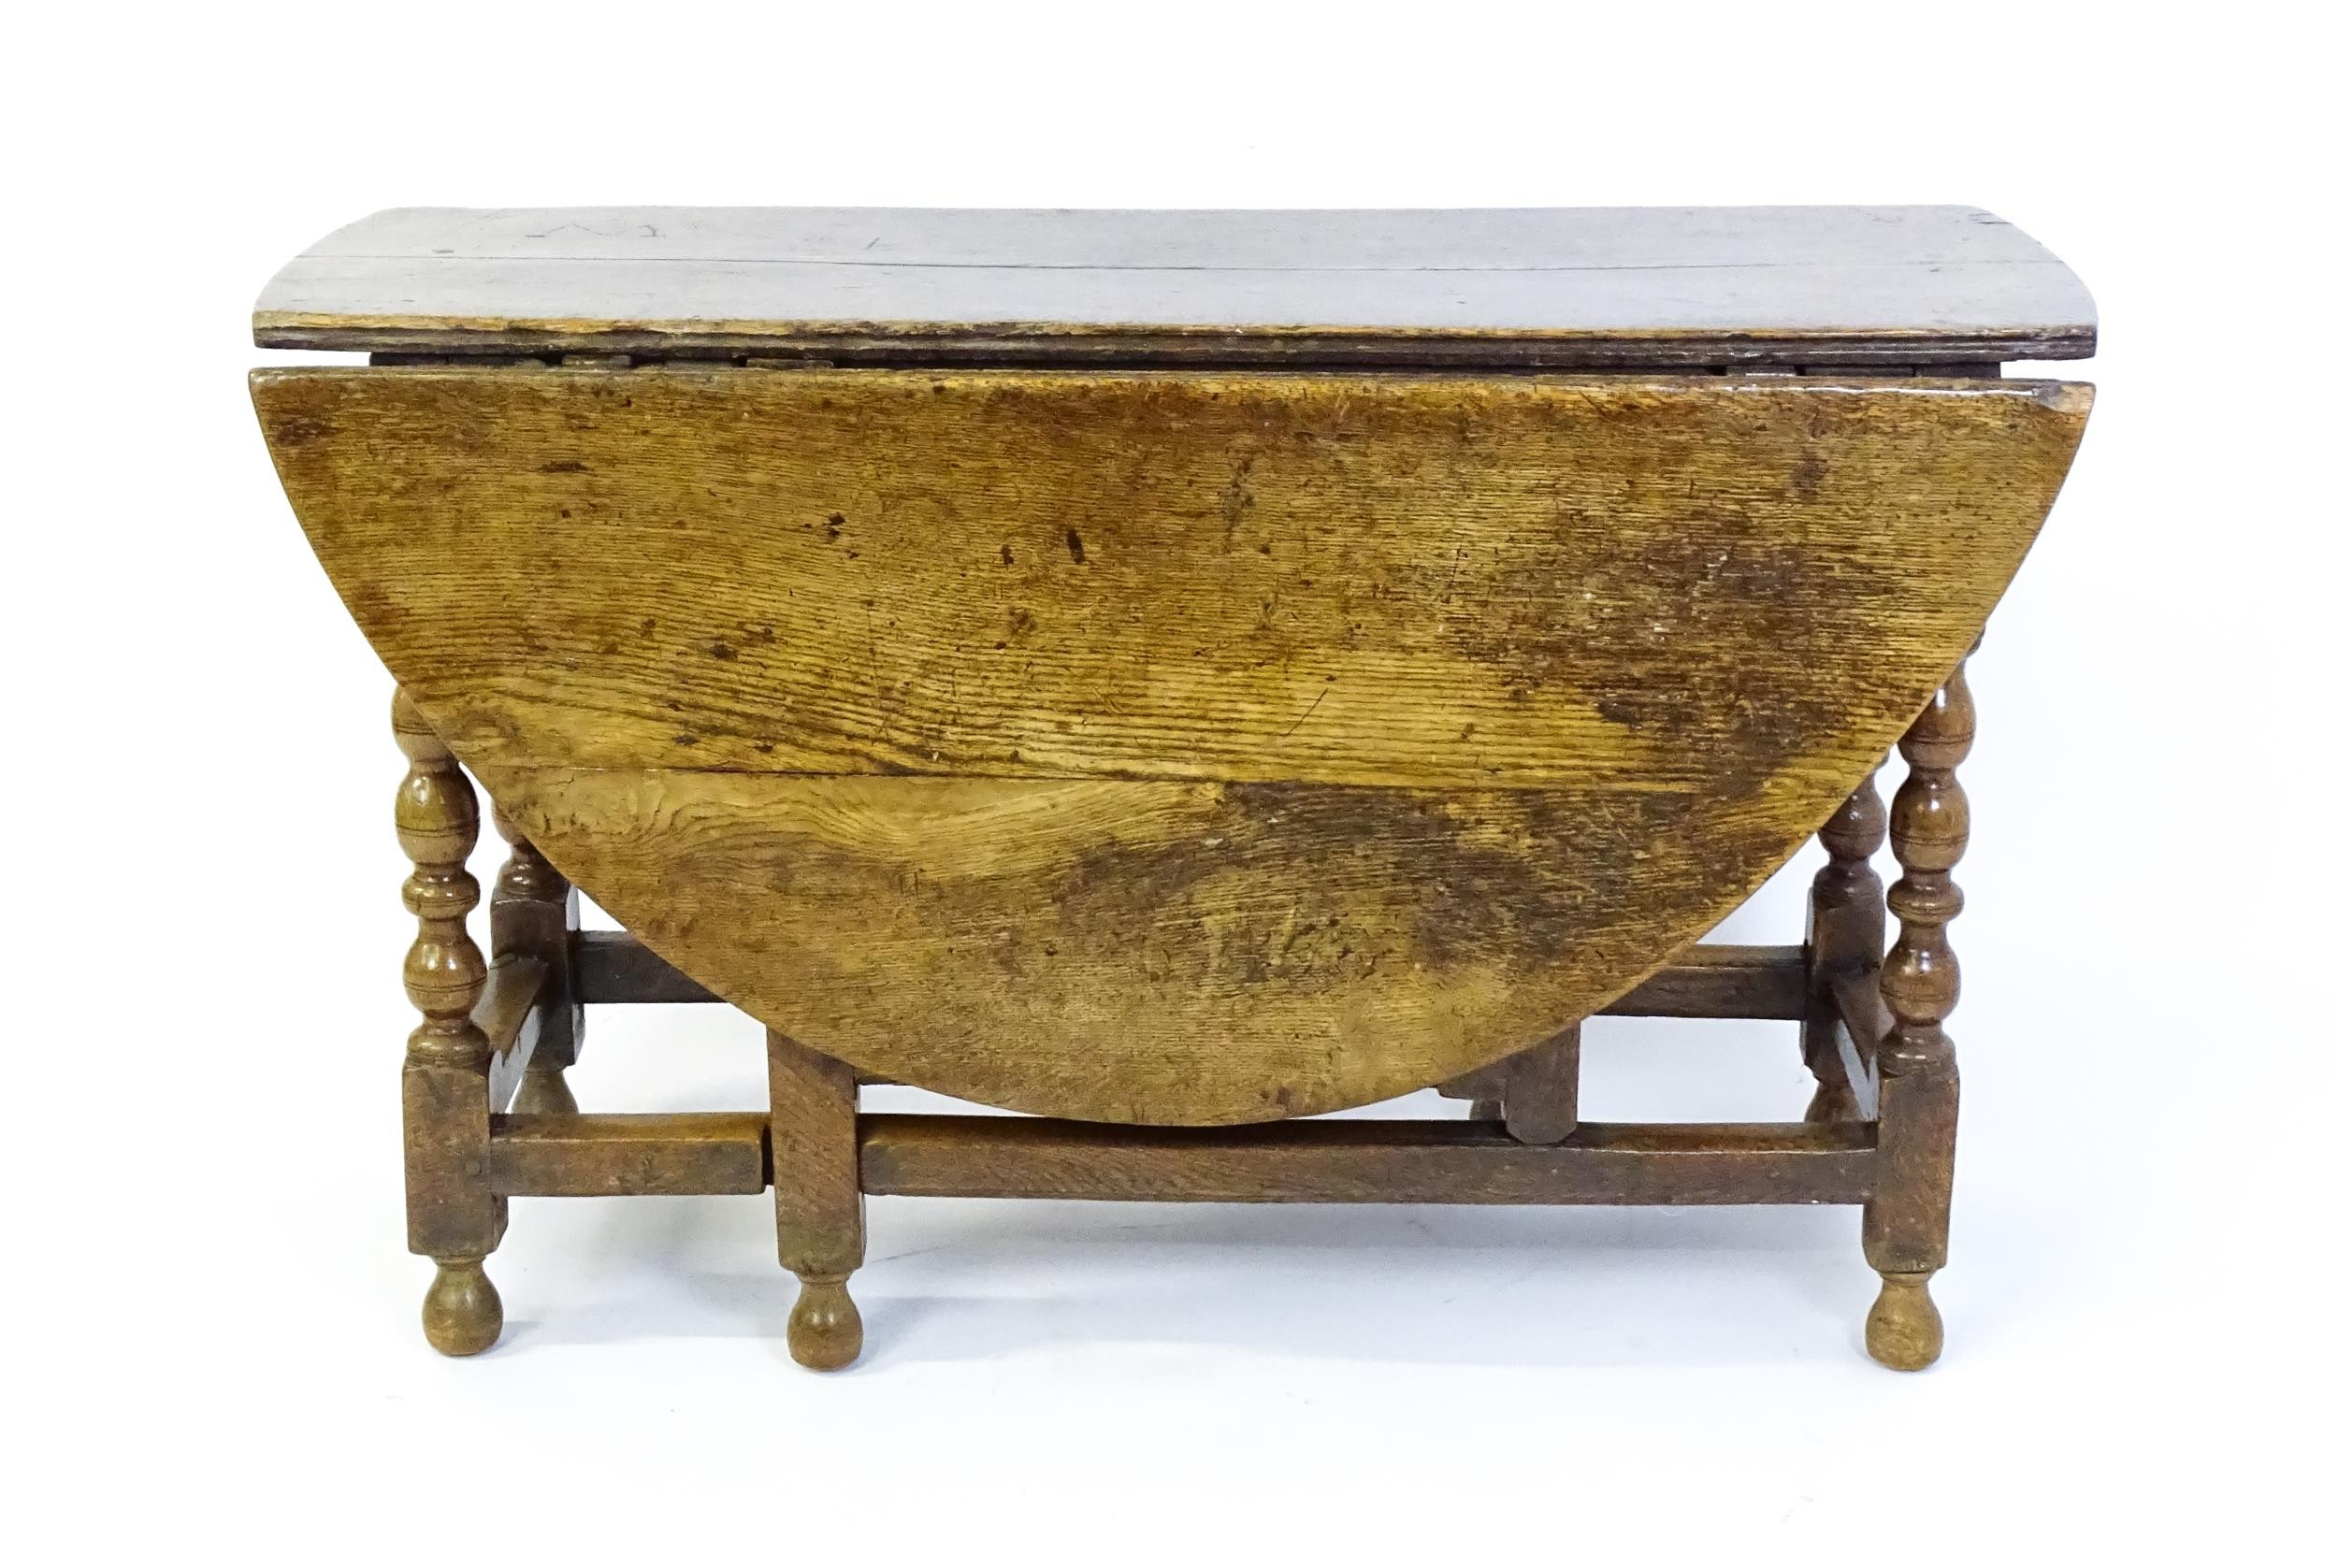 An early 18thC oak drop leaf table of large proportions, the table having two demi lune leaves and - Image 2 of 6